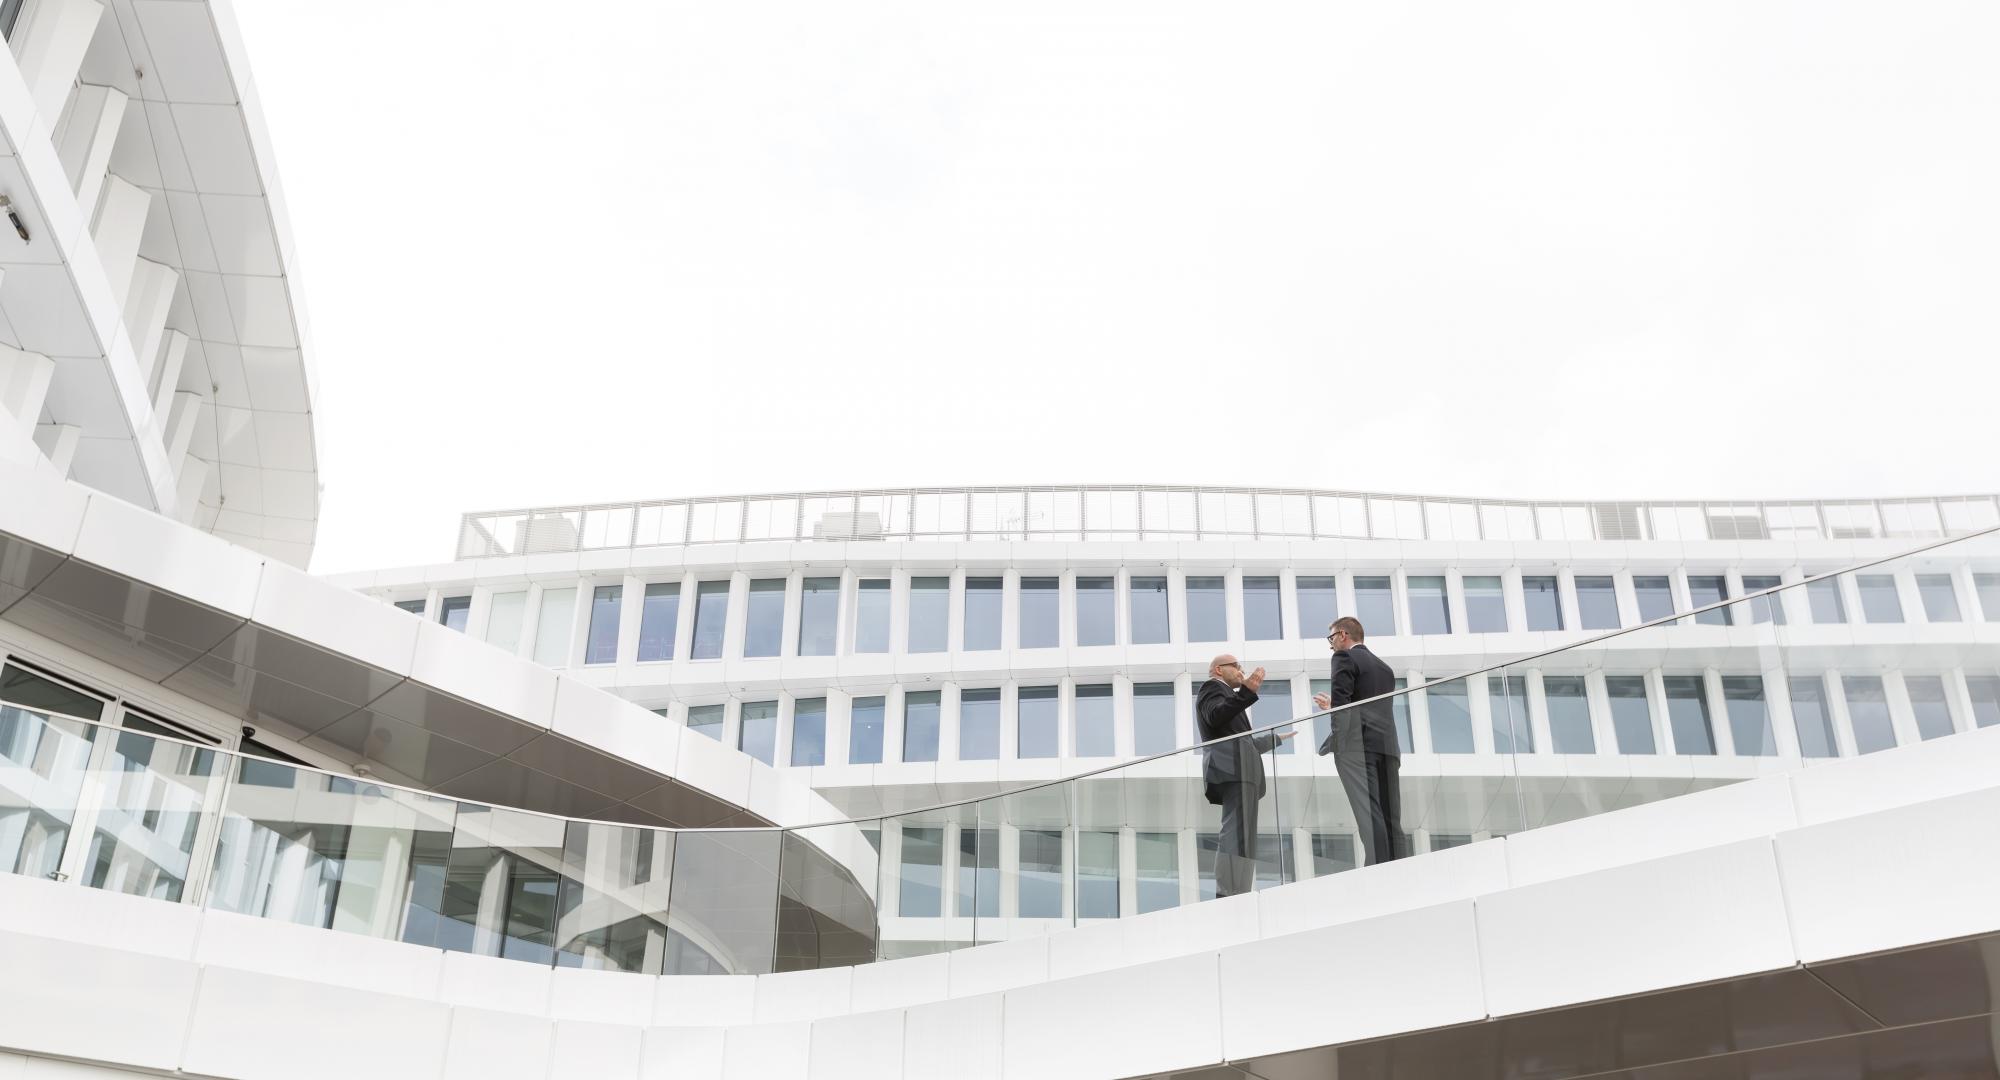 Two people stood outside a modern building